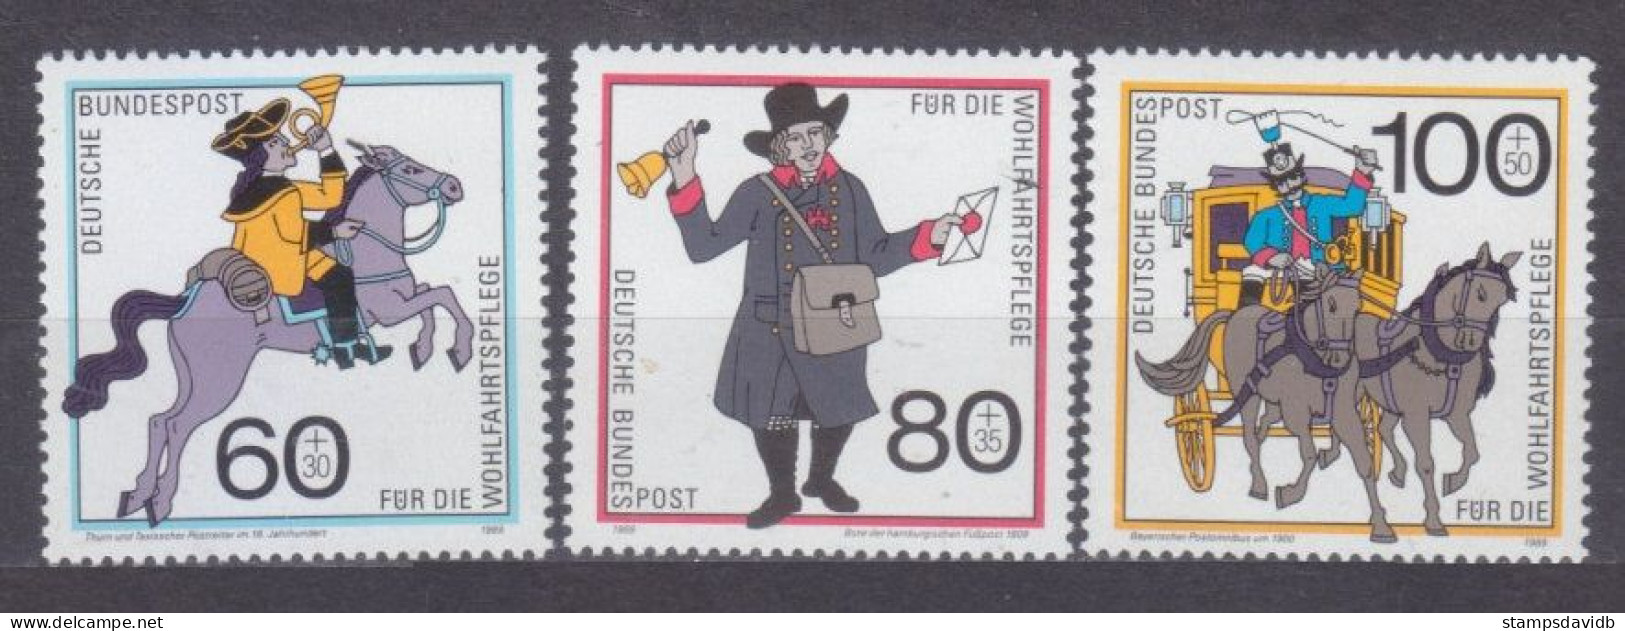 1989 Germany 1437-1439 Postal Couriers 7,00 € - UPU (Union Postale Universelle)